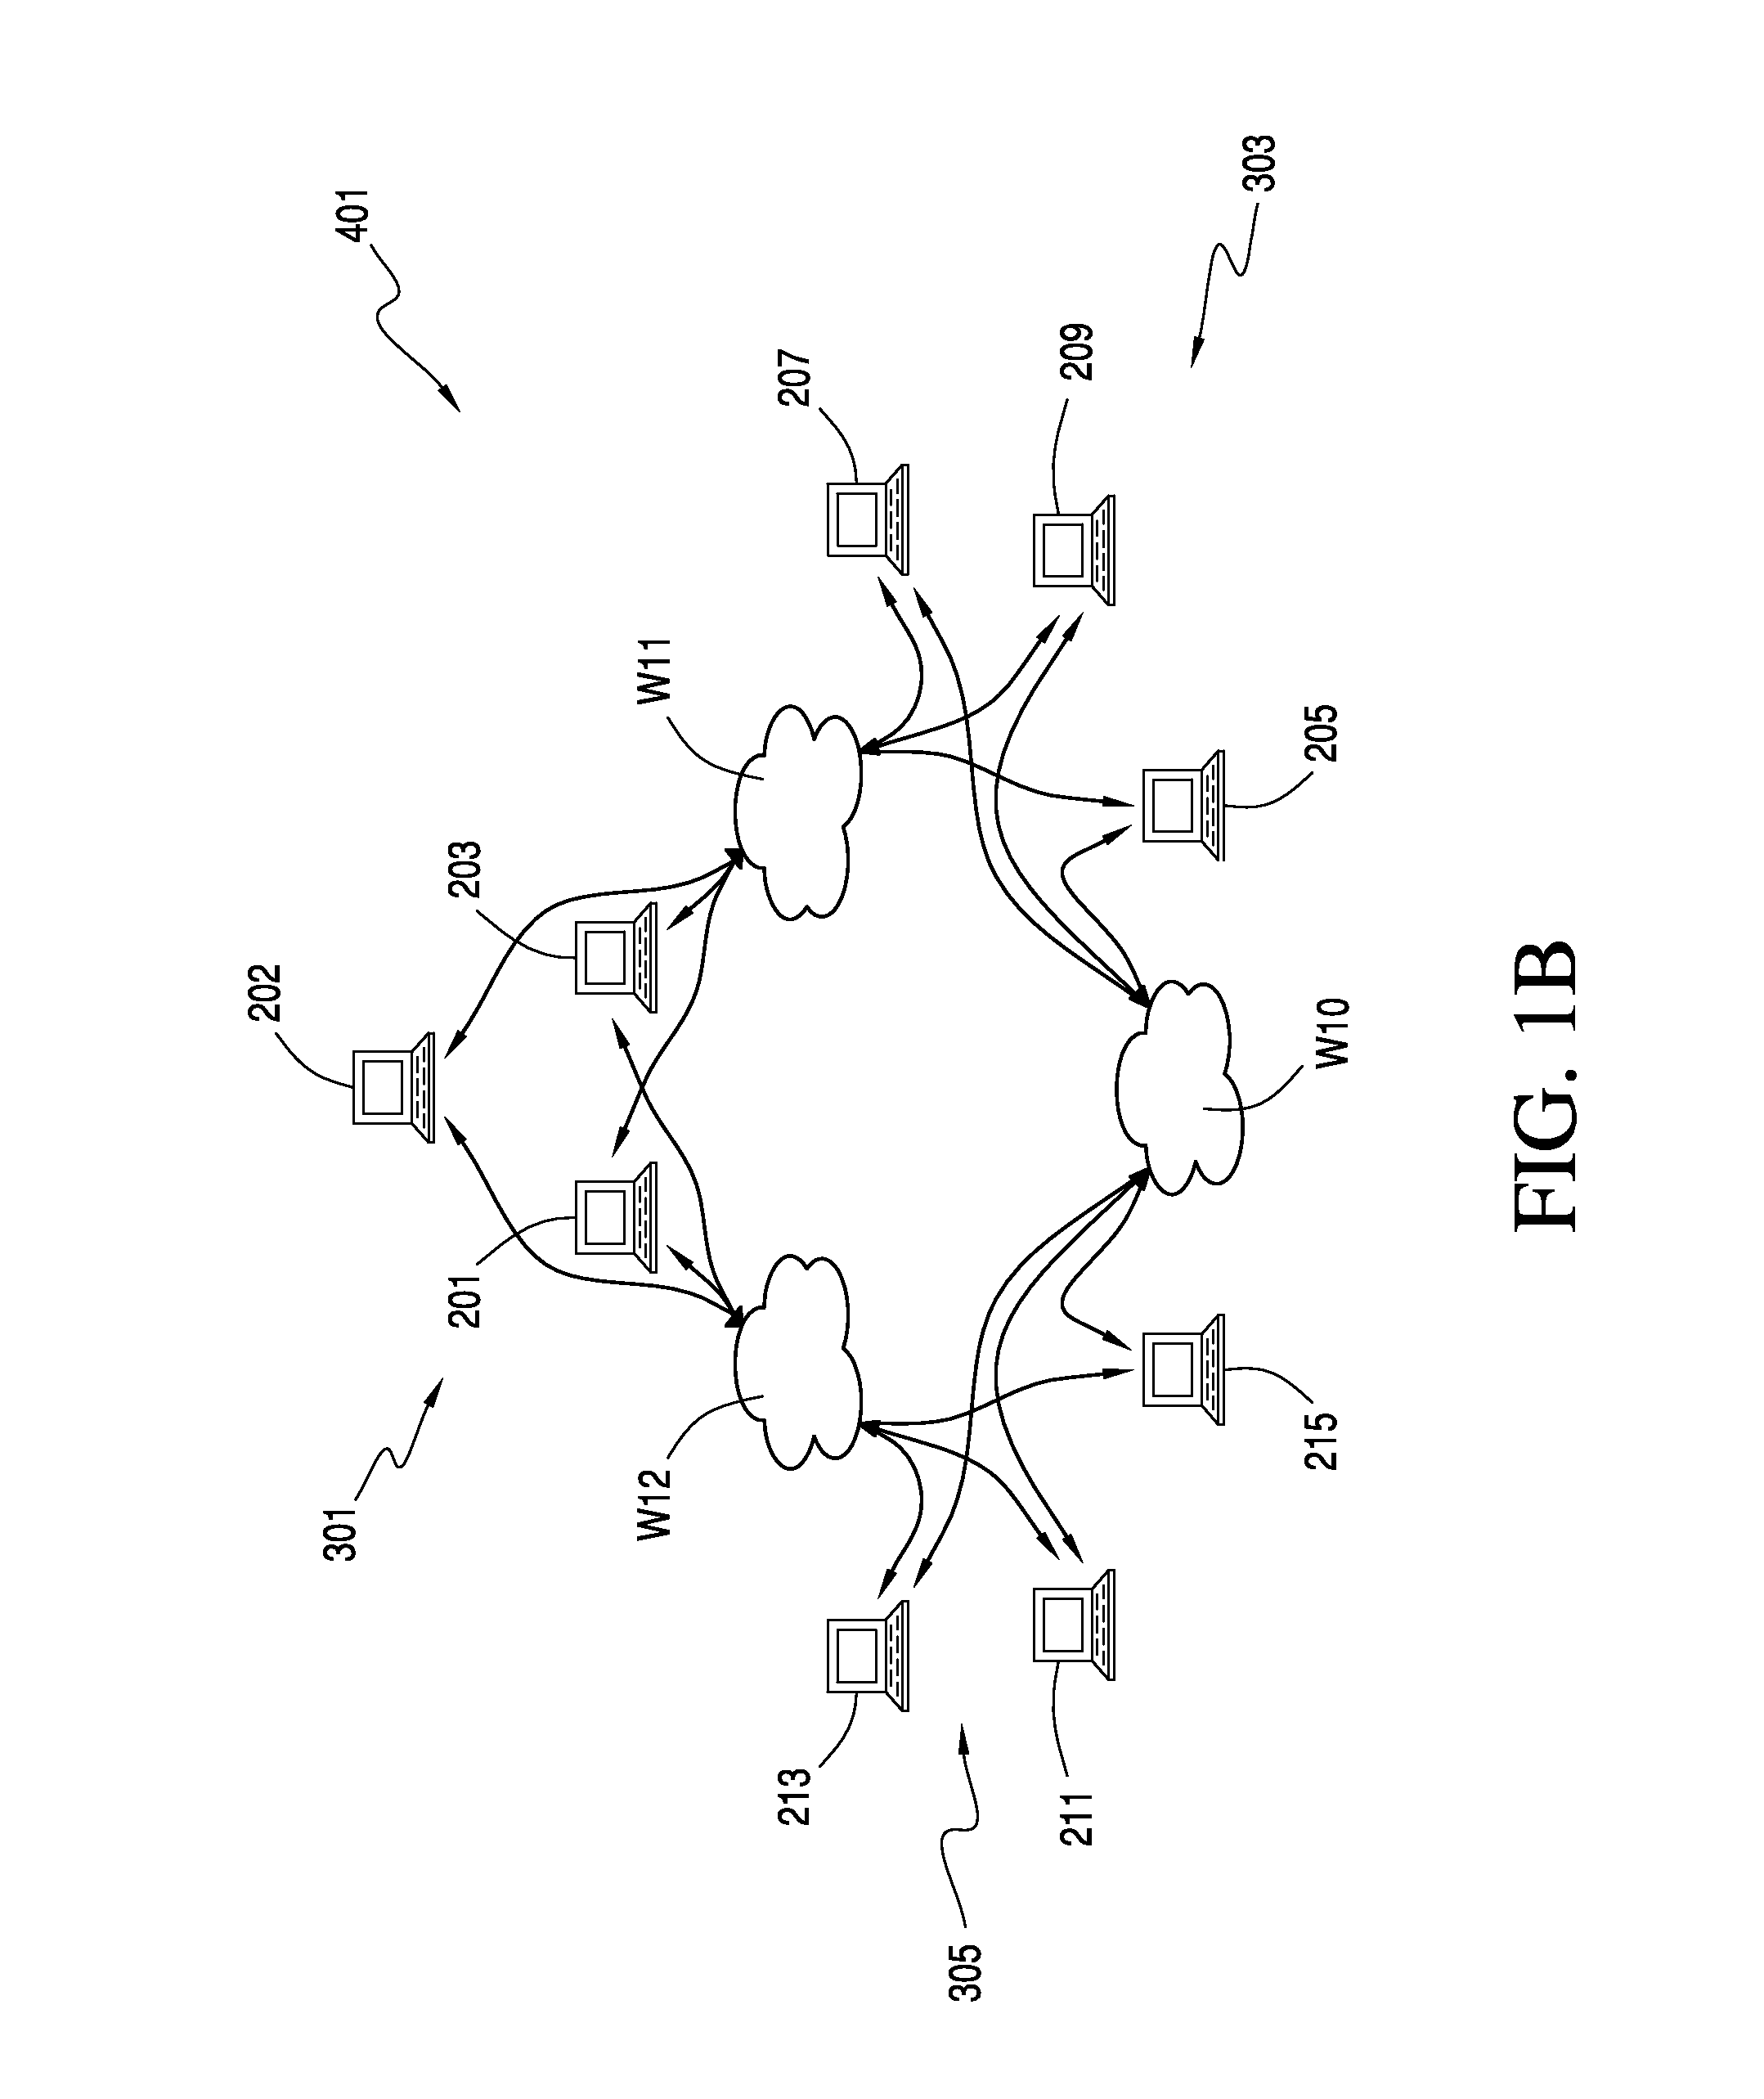 Computer-implemented method for facilitating creation of an advanced digital communications network, and terminal, system and computer-readable medium for the same